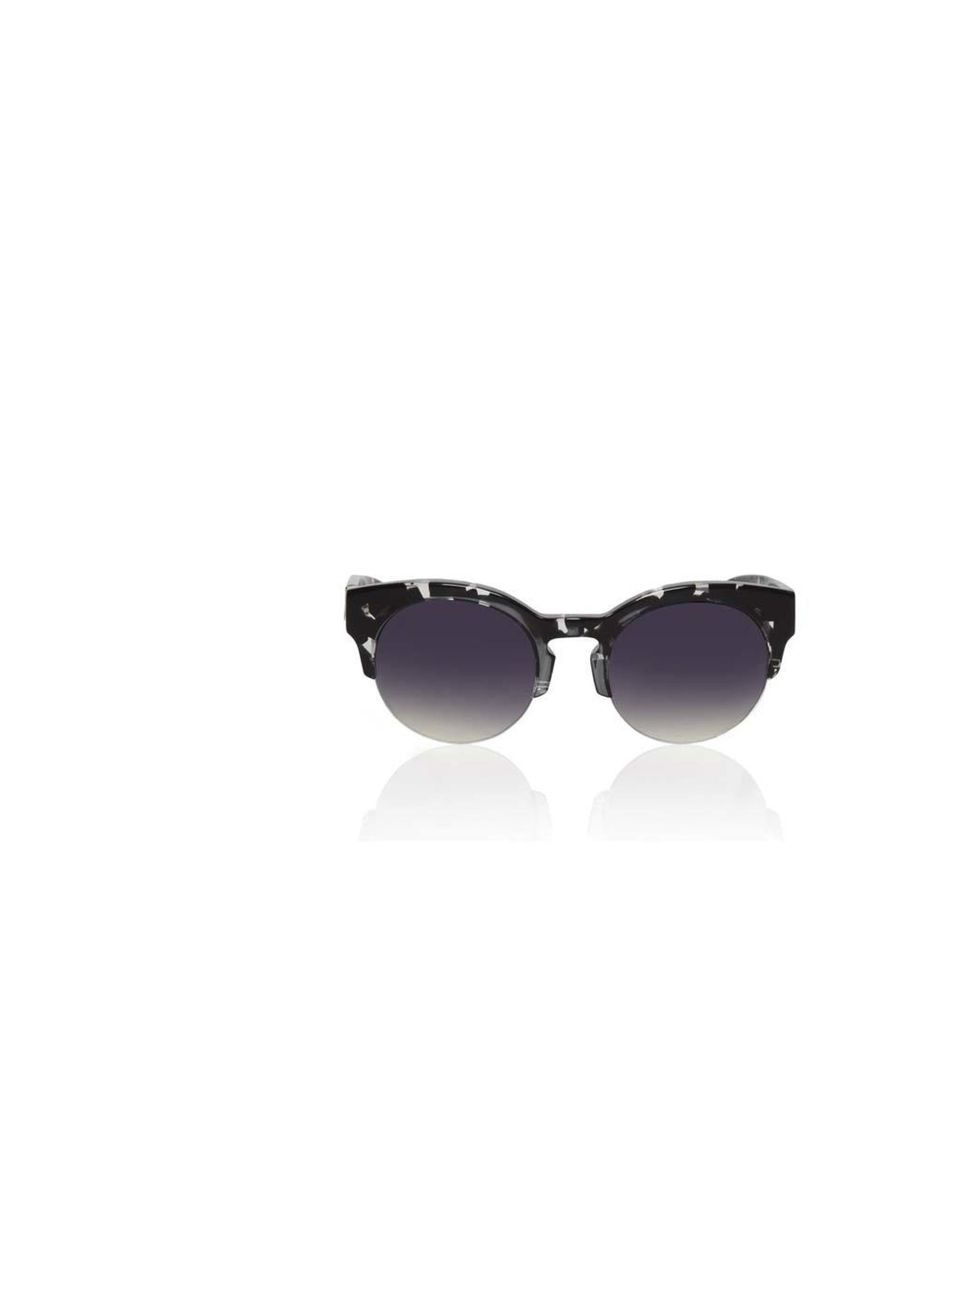 <p>Since it's a million degrees outside, sunglasses are all that I want to buy at the moment! </p><p>- Leisa Barnett, News & Social Media Editor</p><p><a href="http://www.kurtgeiger.com/women/accessories/sunglasses/pam-half-frame-sunglass-black-other-hand